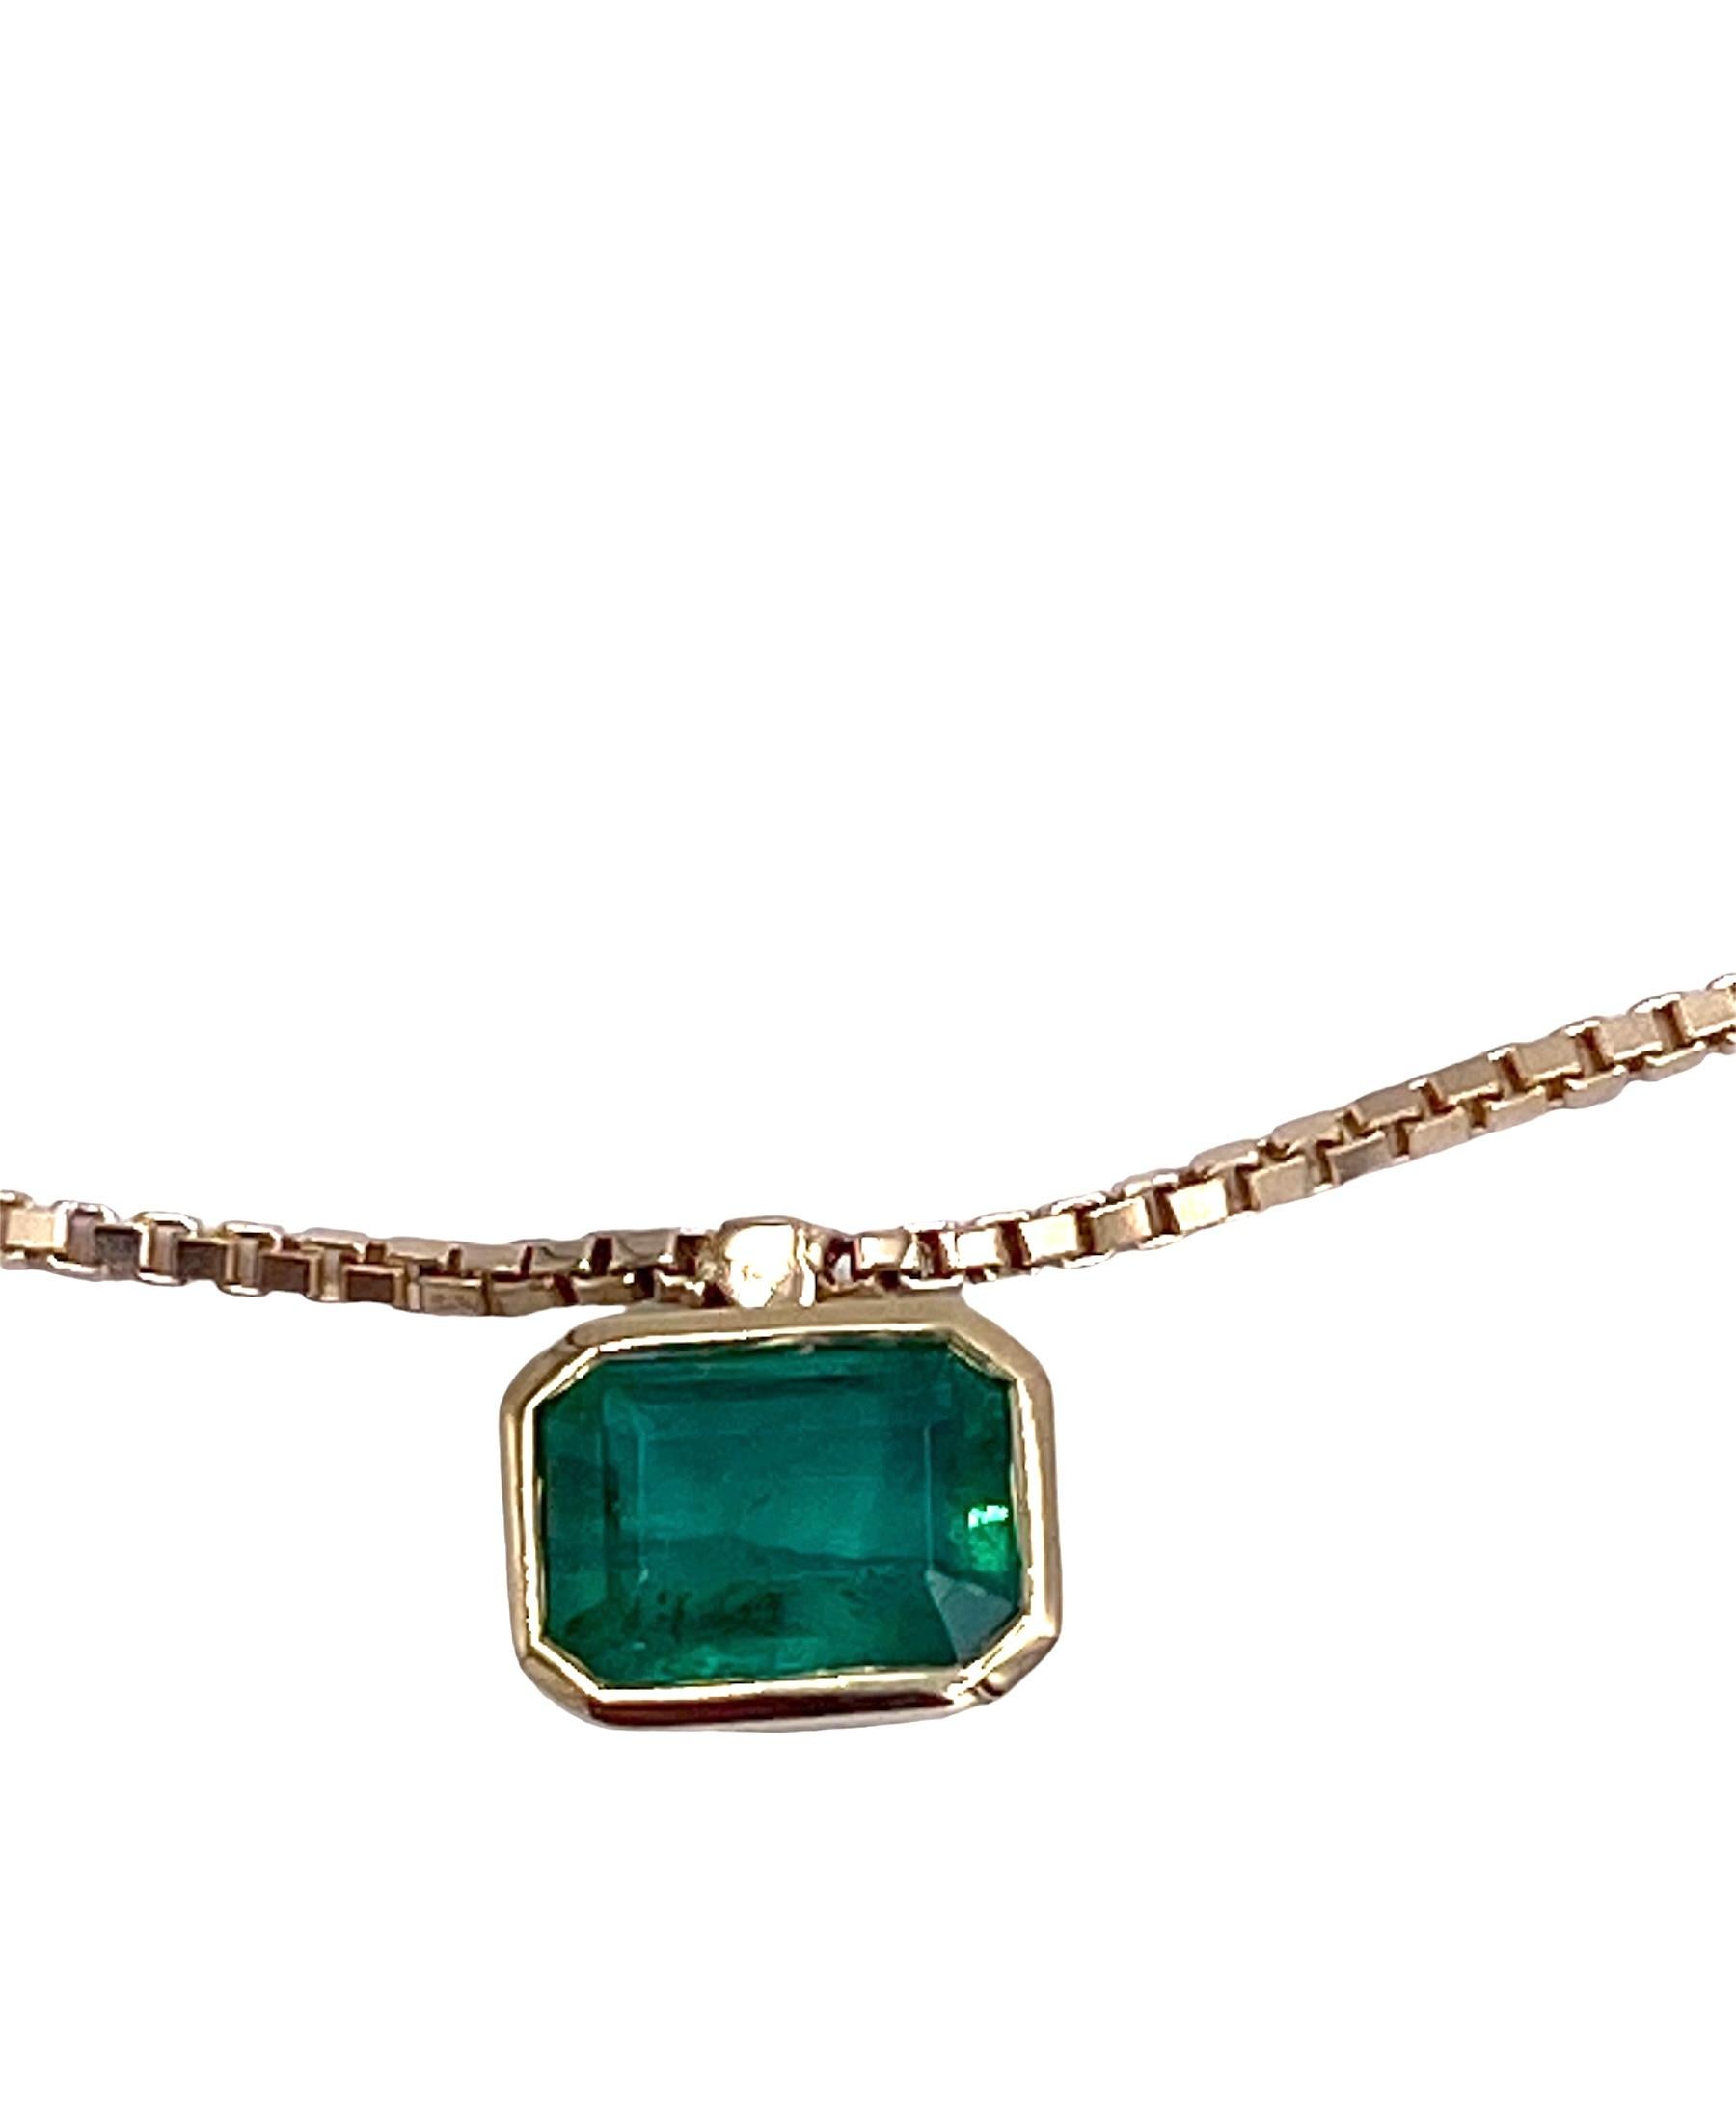 Rossella Ugolini Modern Emerald Man Necklace Crafted in Italy 18K Yellow Gold In New Condition For Sale In Rome, IT